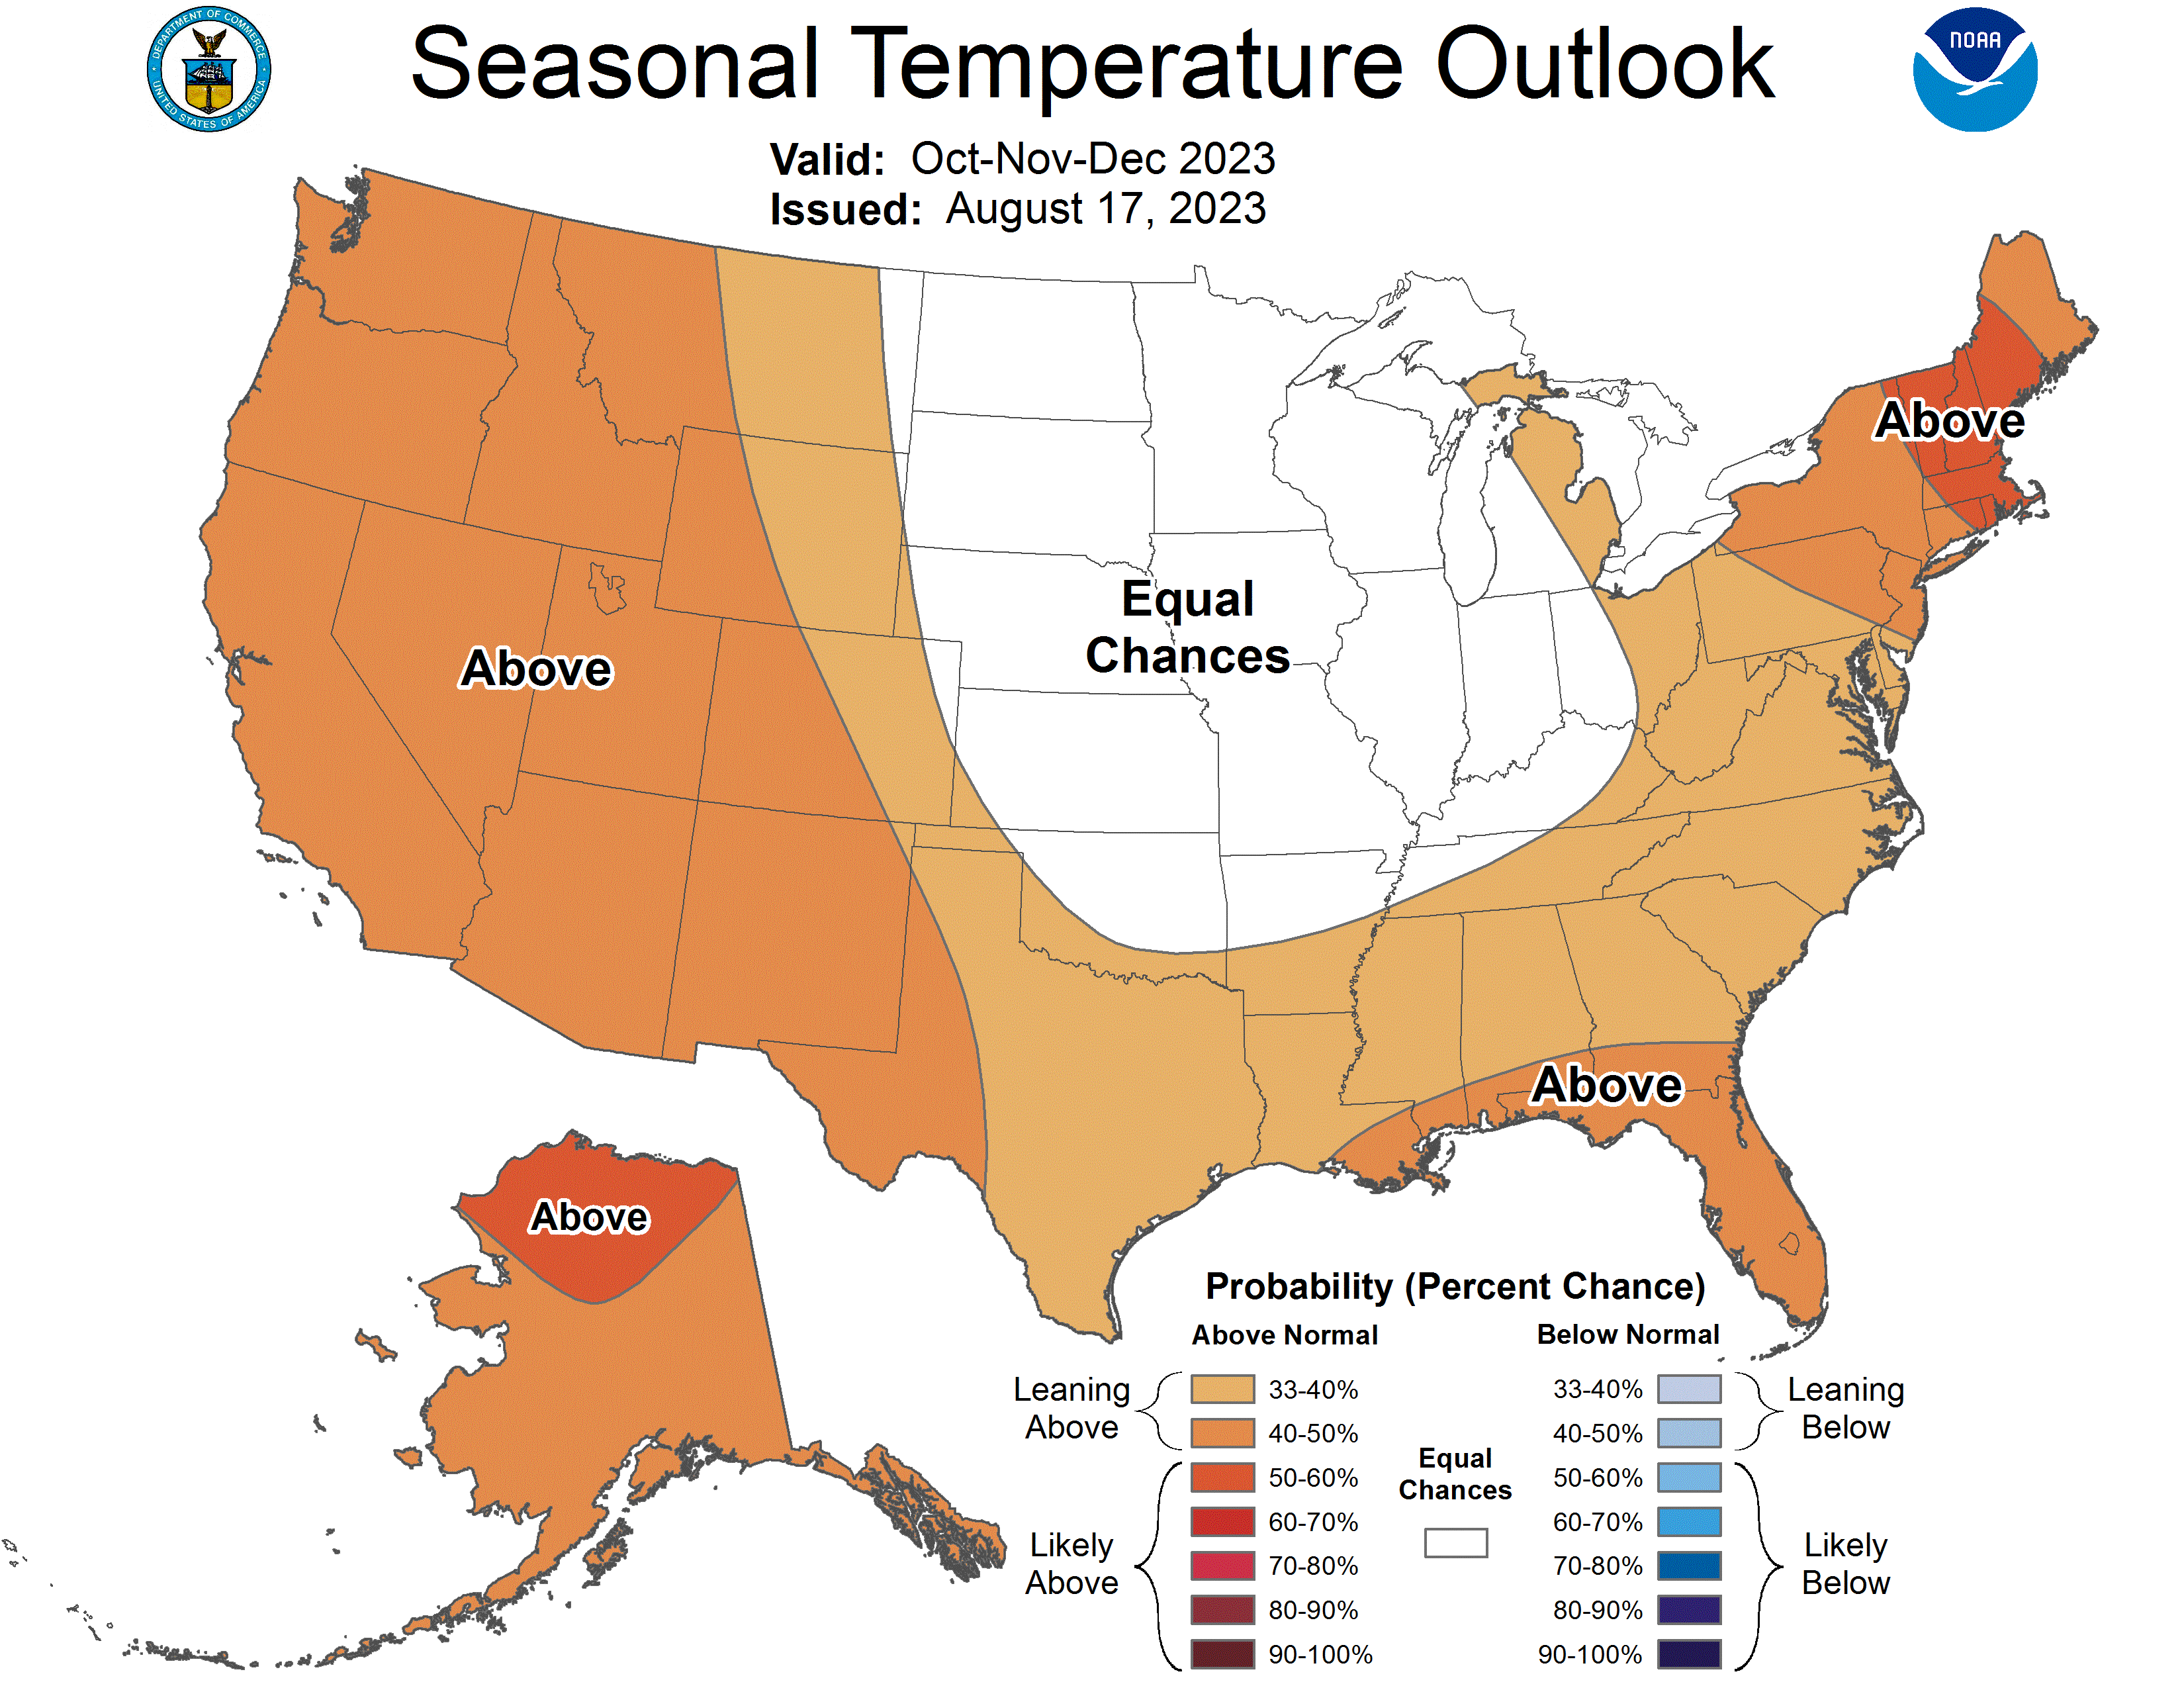 Seasonal temperature outlook for September, October and November 2023 from the National Weather Service.